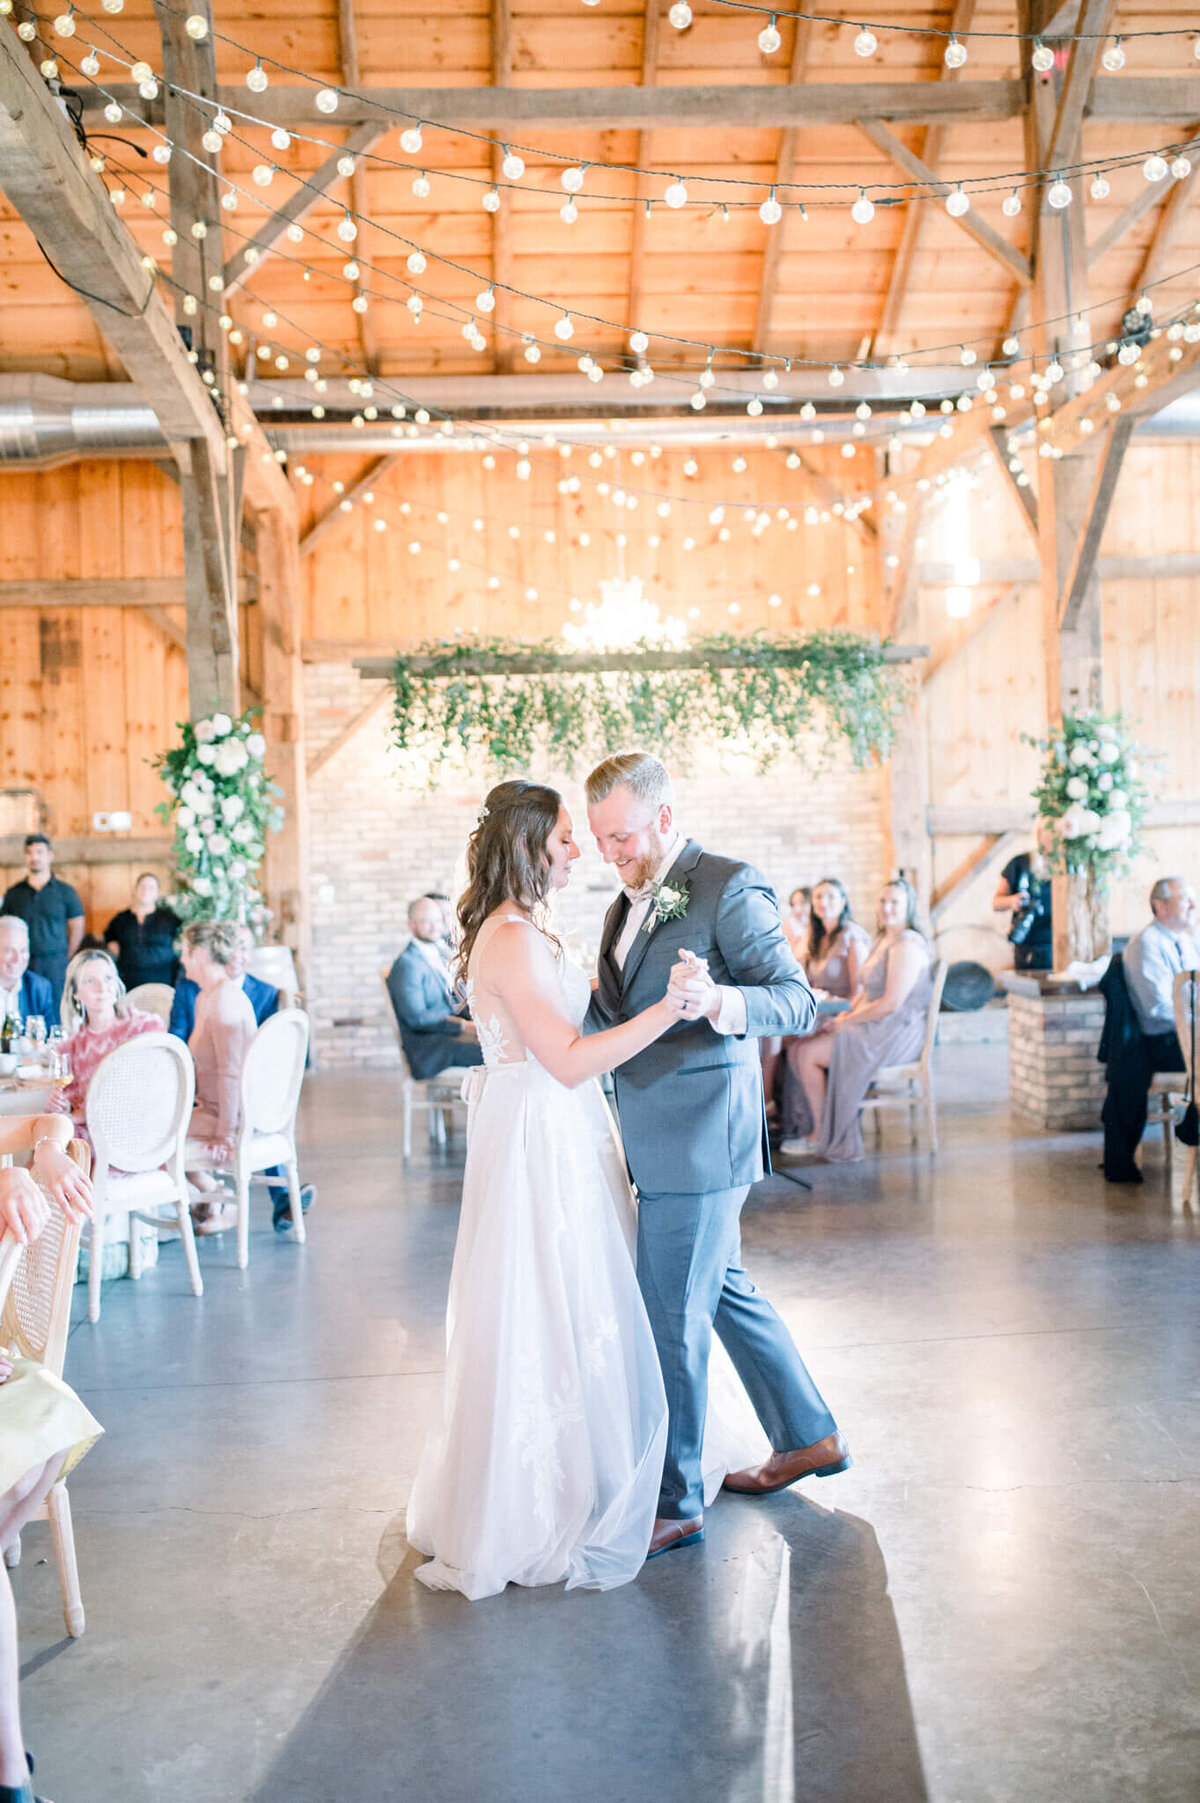 Bride and Groom take their first dance in their Toronto barn wedding